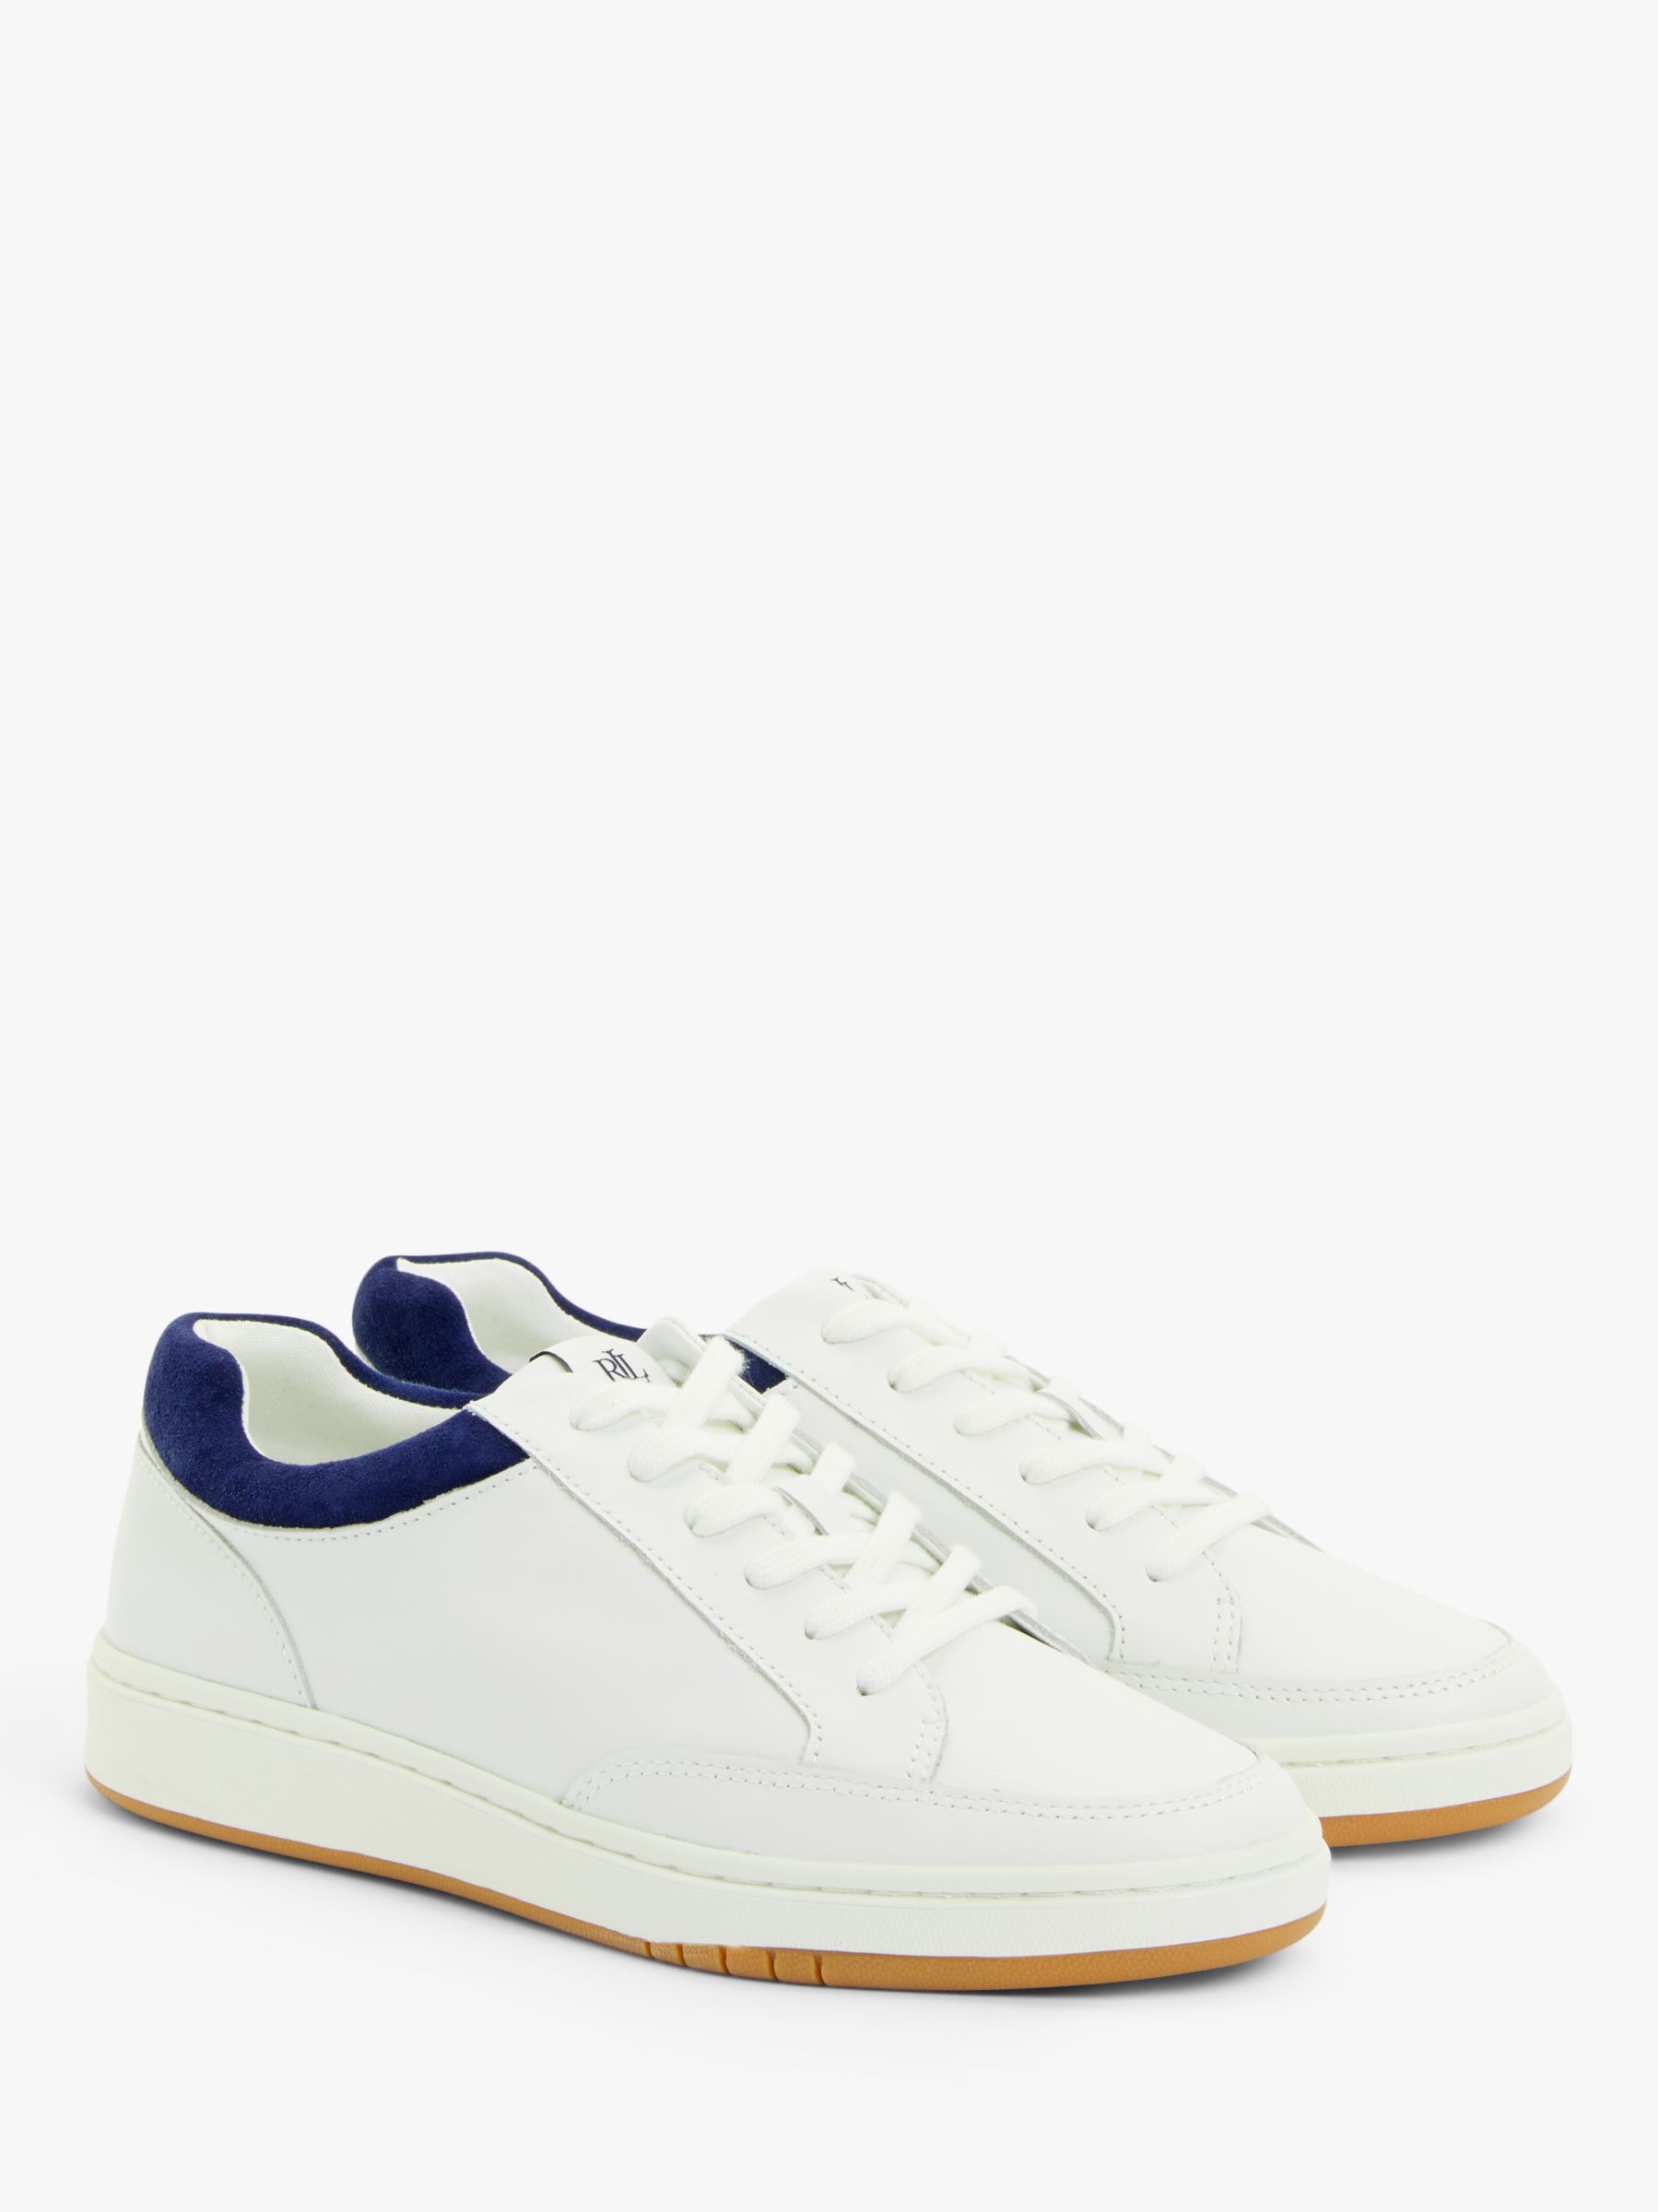 Ralph Lauren Hailey Leather Lace Up Trainers, White